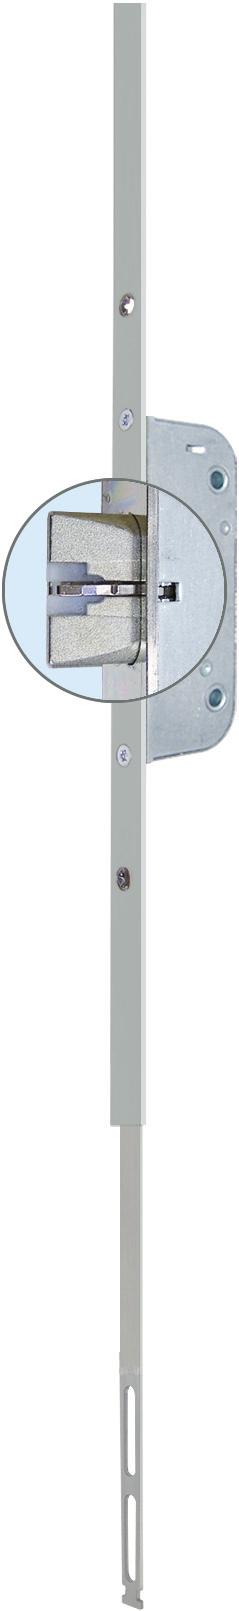 Additional locking point for taller doors To be used with key-operated door locks 6-28485